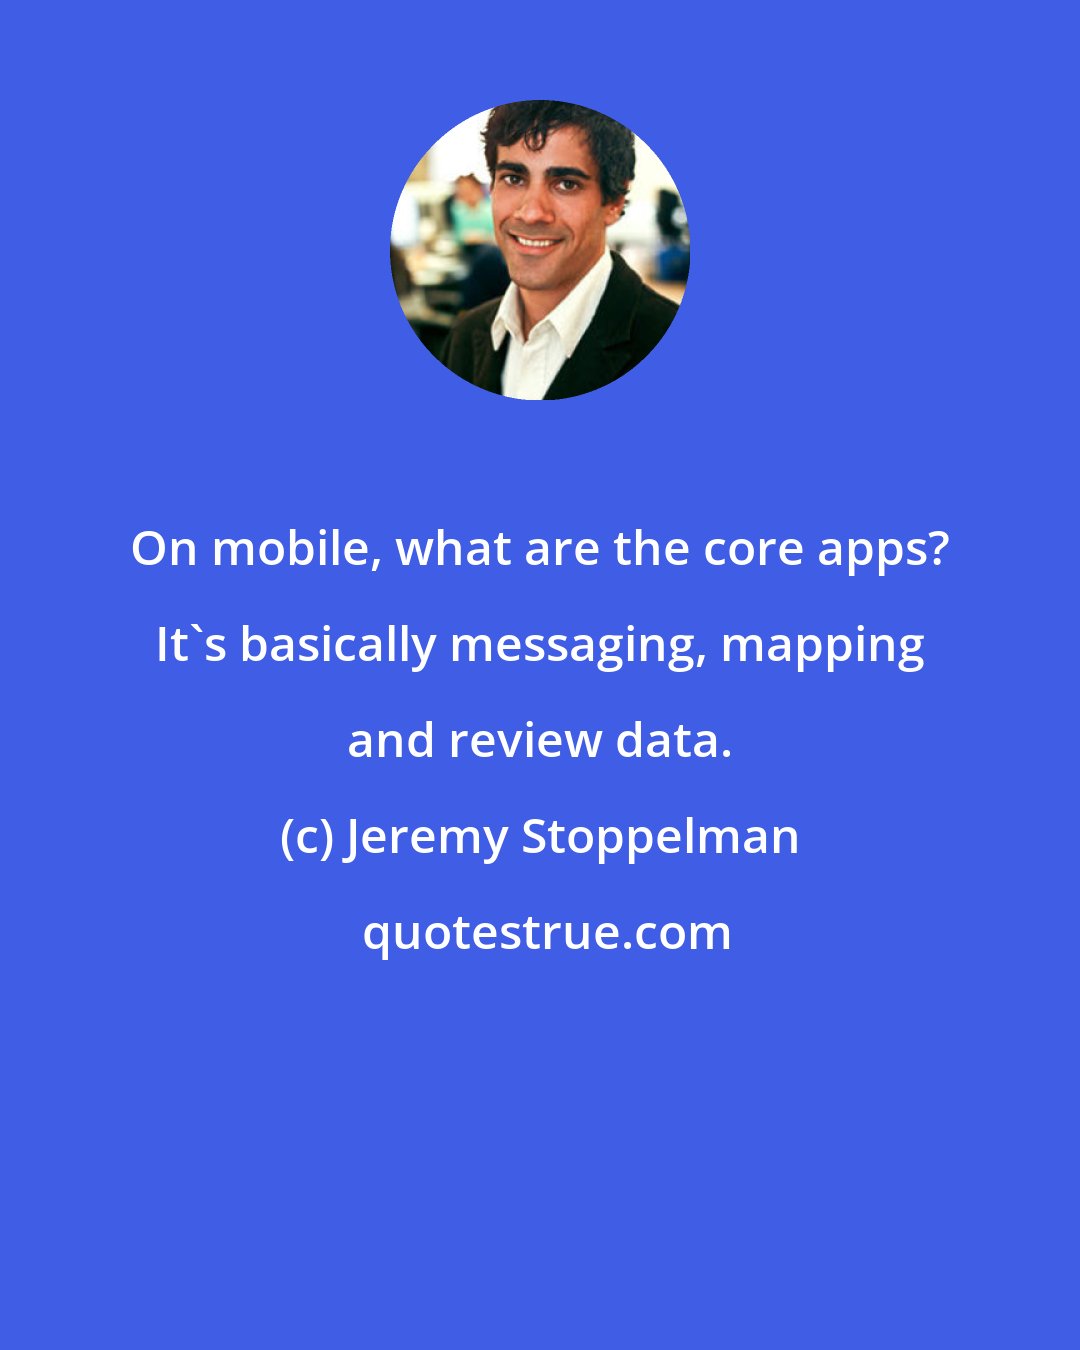 Jeremy Stoppelman: On mobile, what are the core apps? It's basically messaging, mapping and review data.